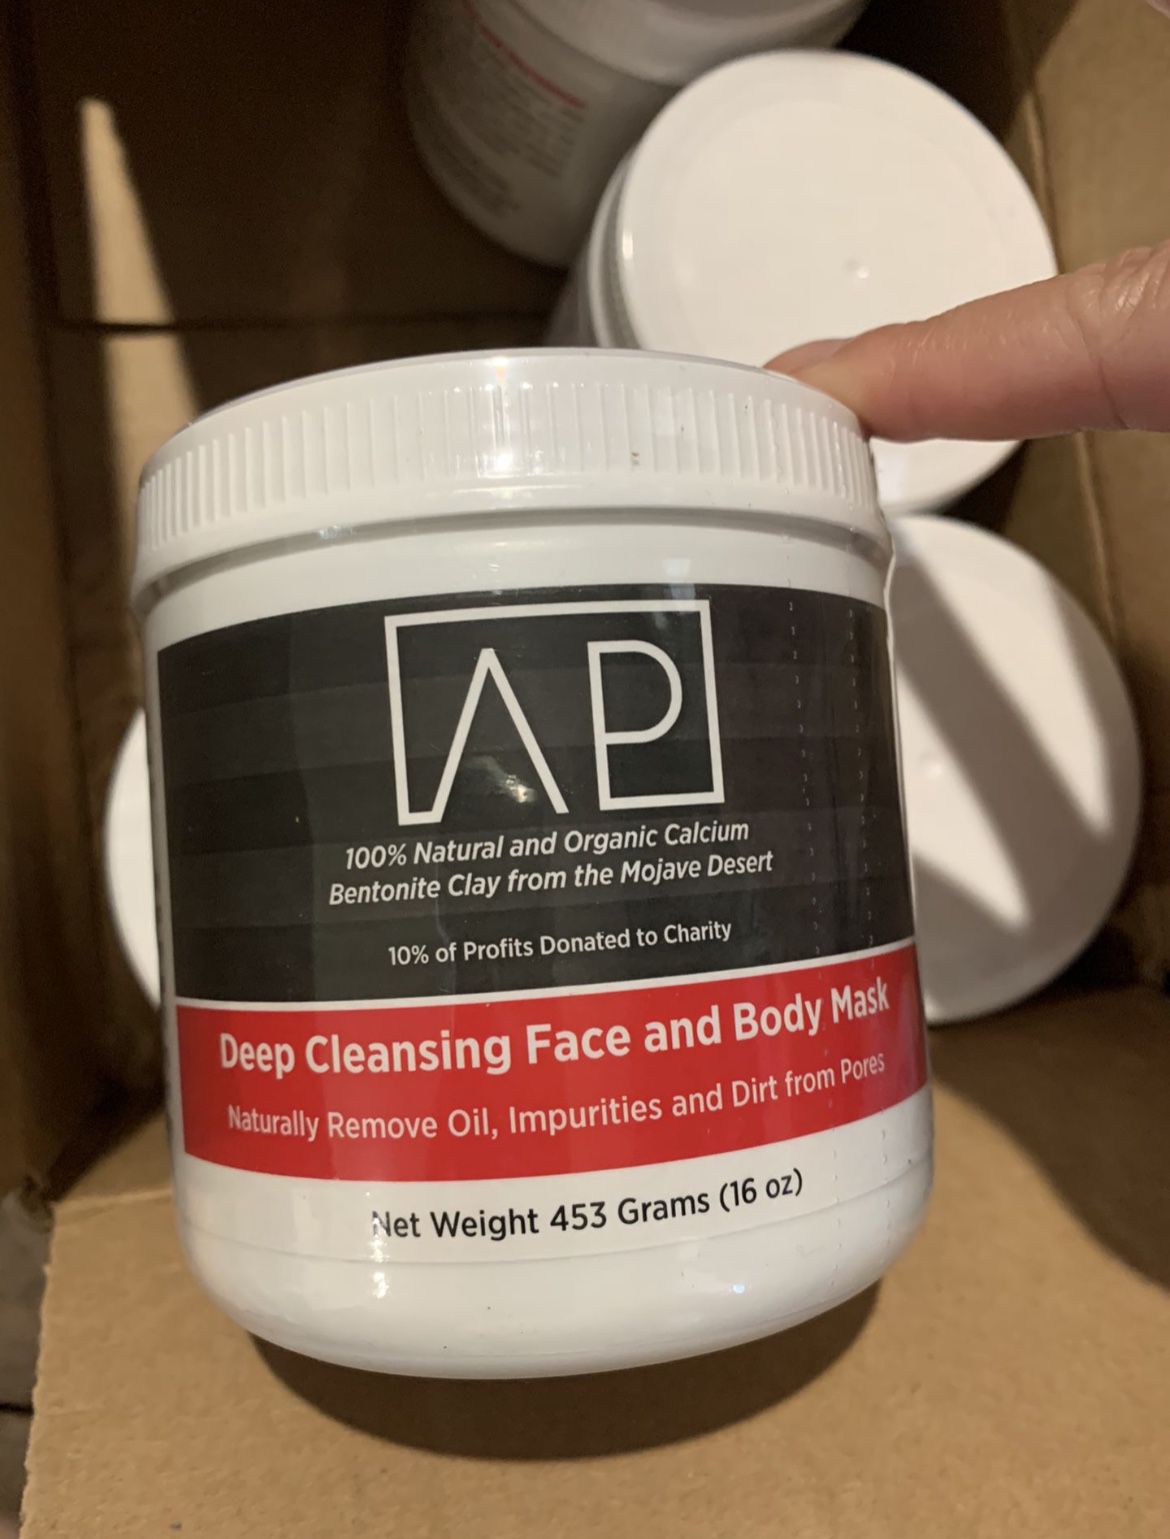 Deep cleansing face and body mask